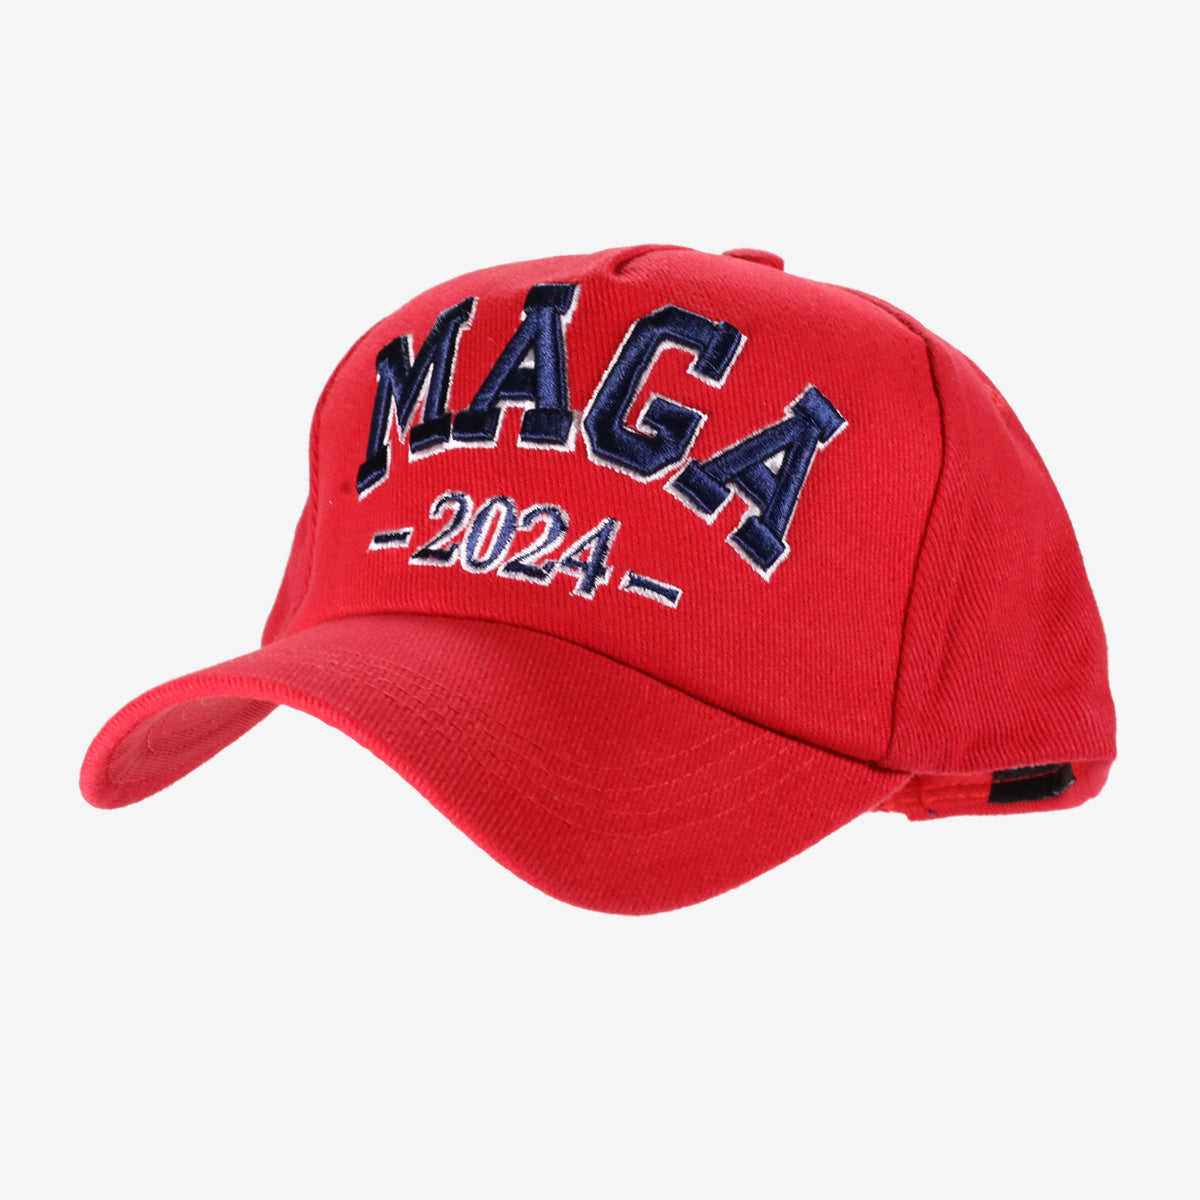 MAGA 2024 Embroidered Hat